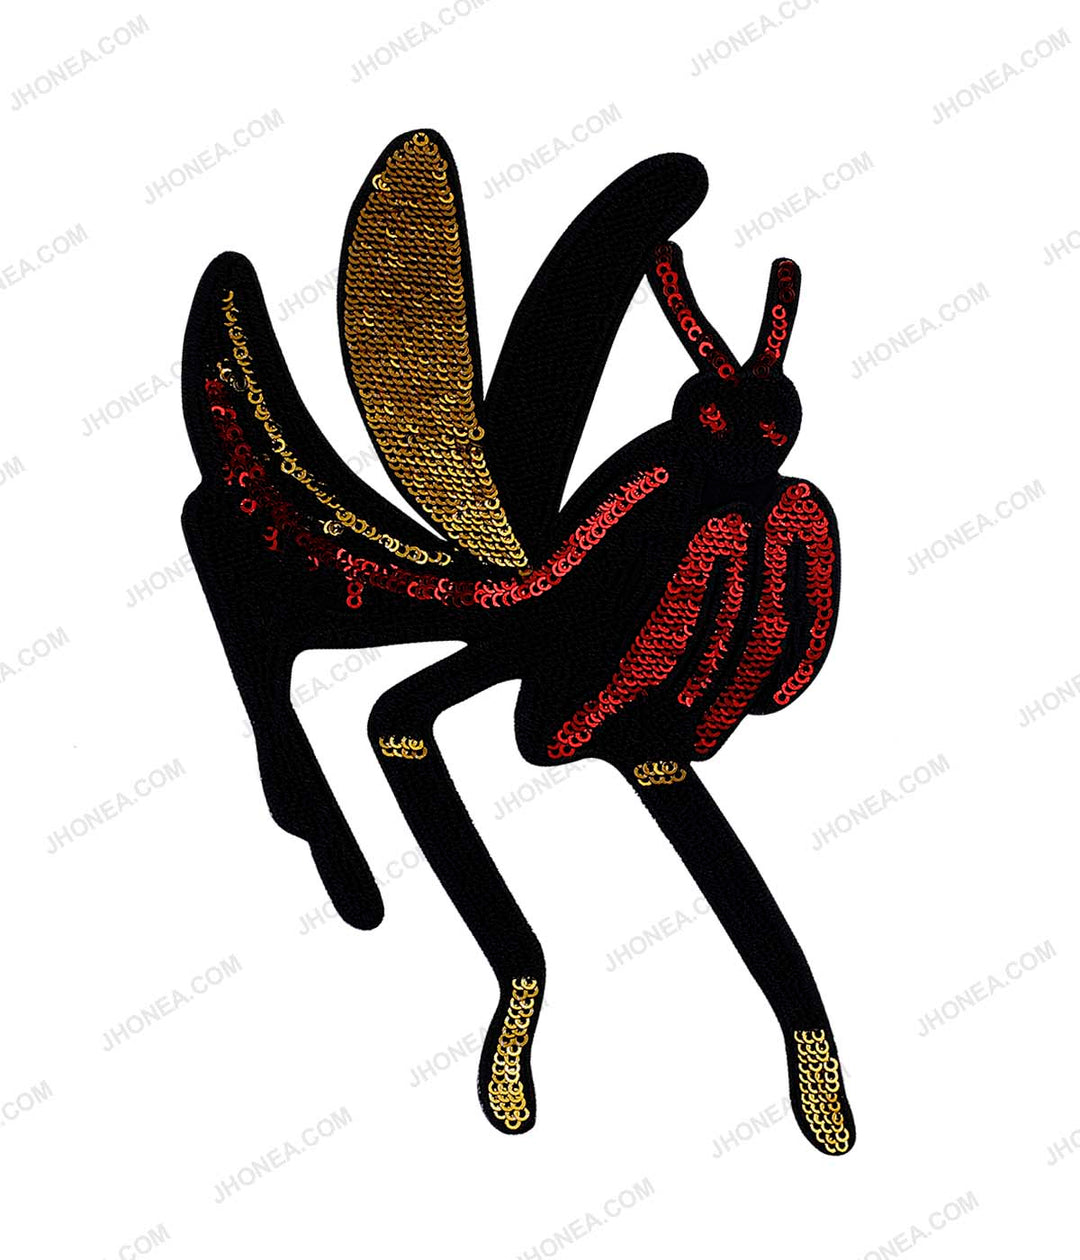 Grasshopper Insect Embroidered Applique Sequins Patch